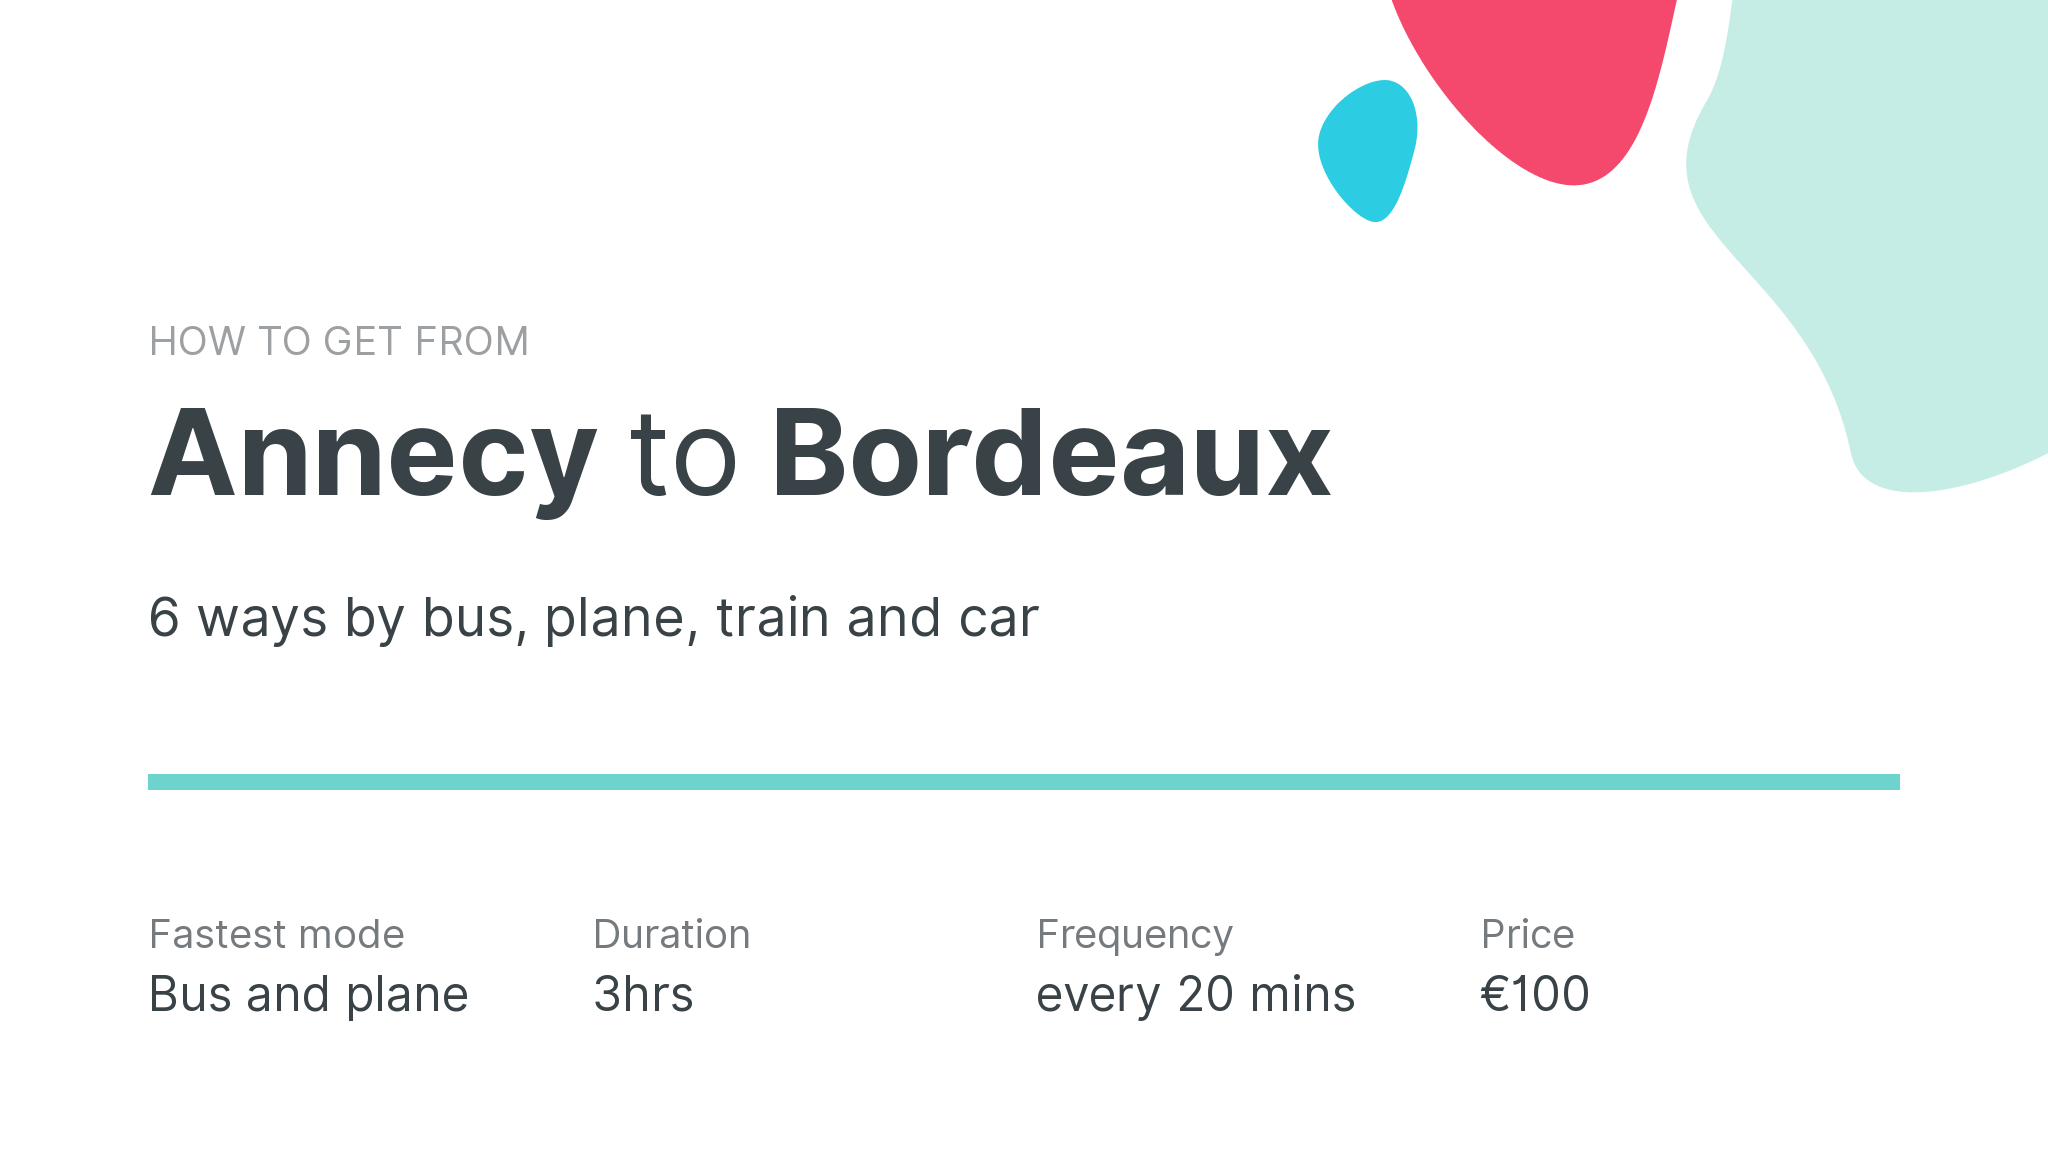 How do I get from Annecy to Bordeaux